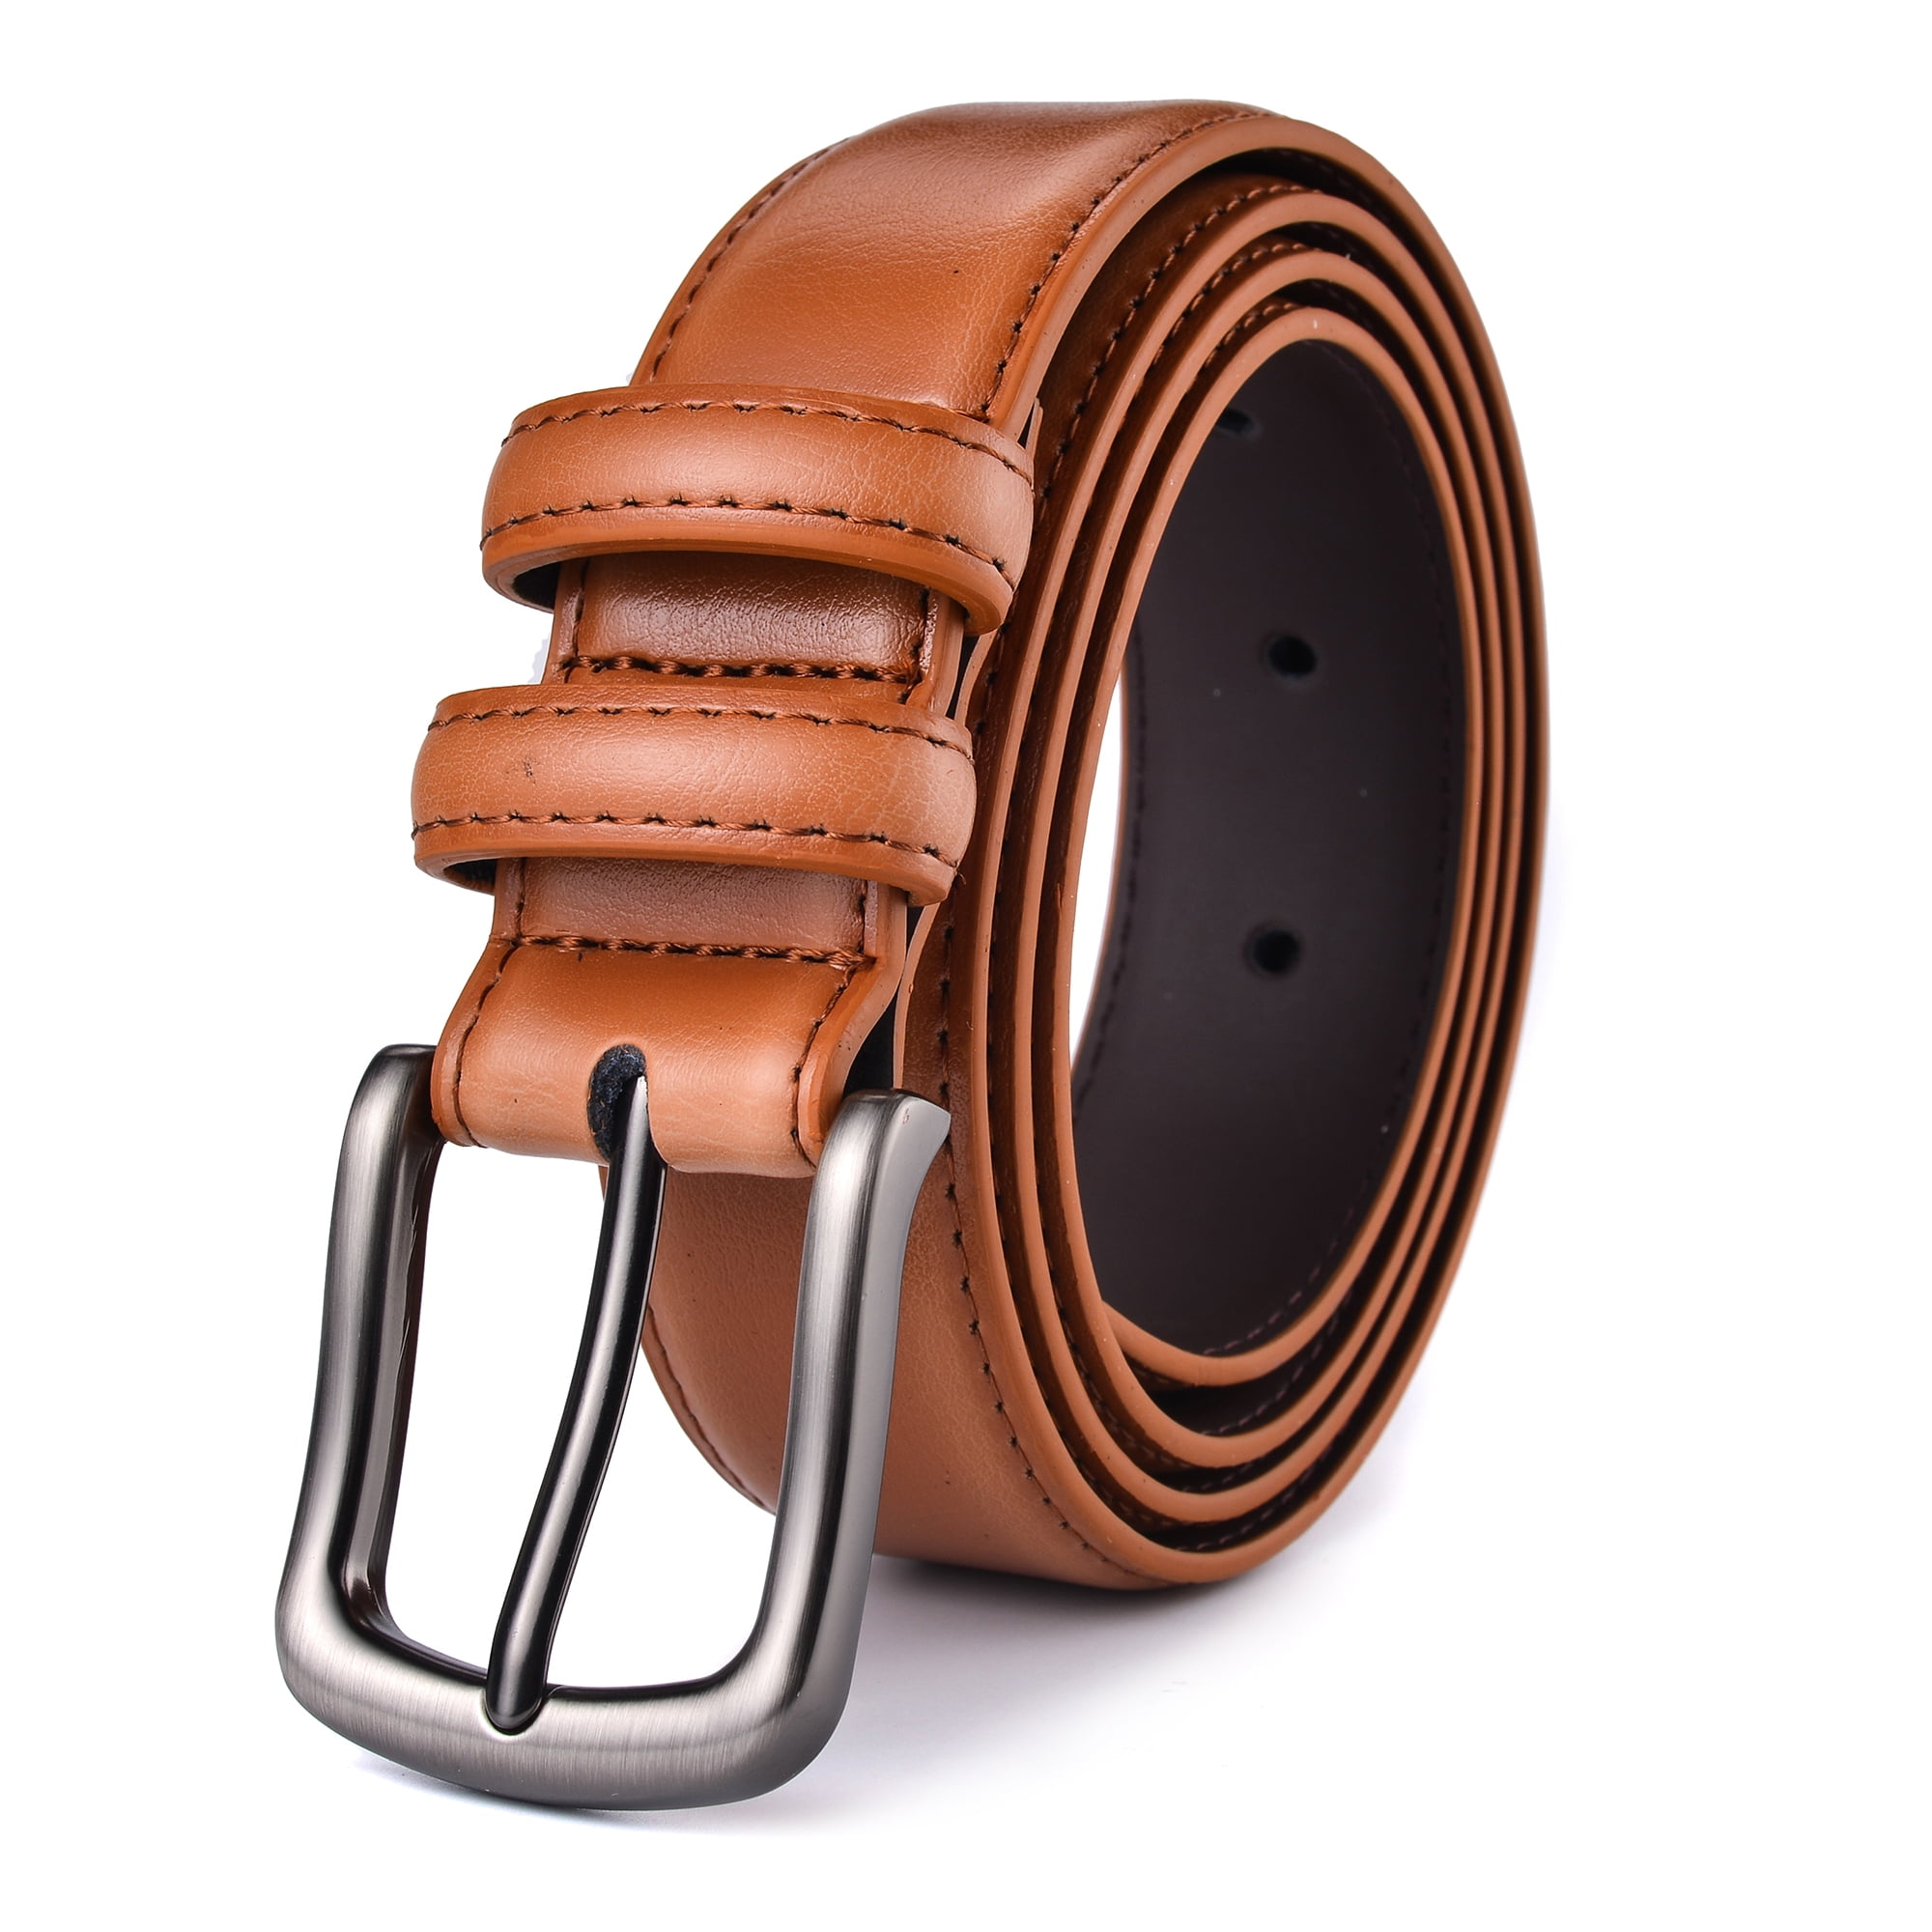 Mens 1 inch wide leather belts (S / 2933 Inches, Brown) Amazon.co.uk ...